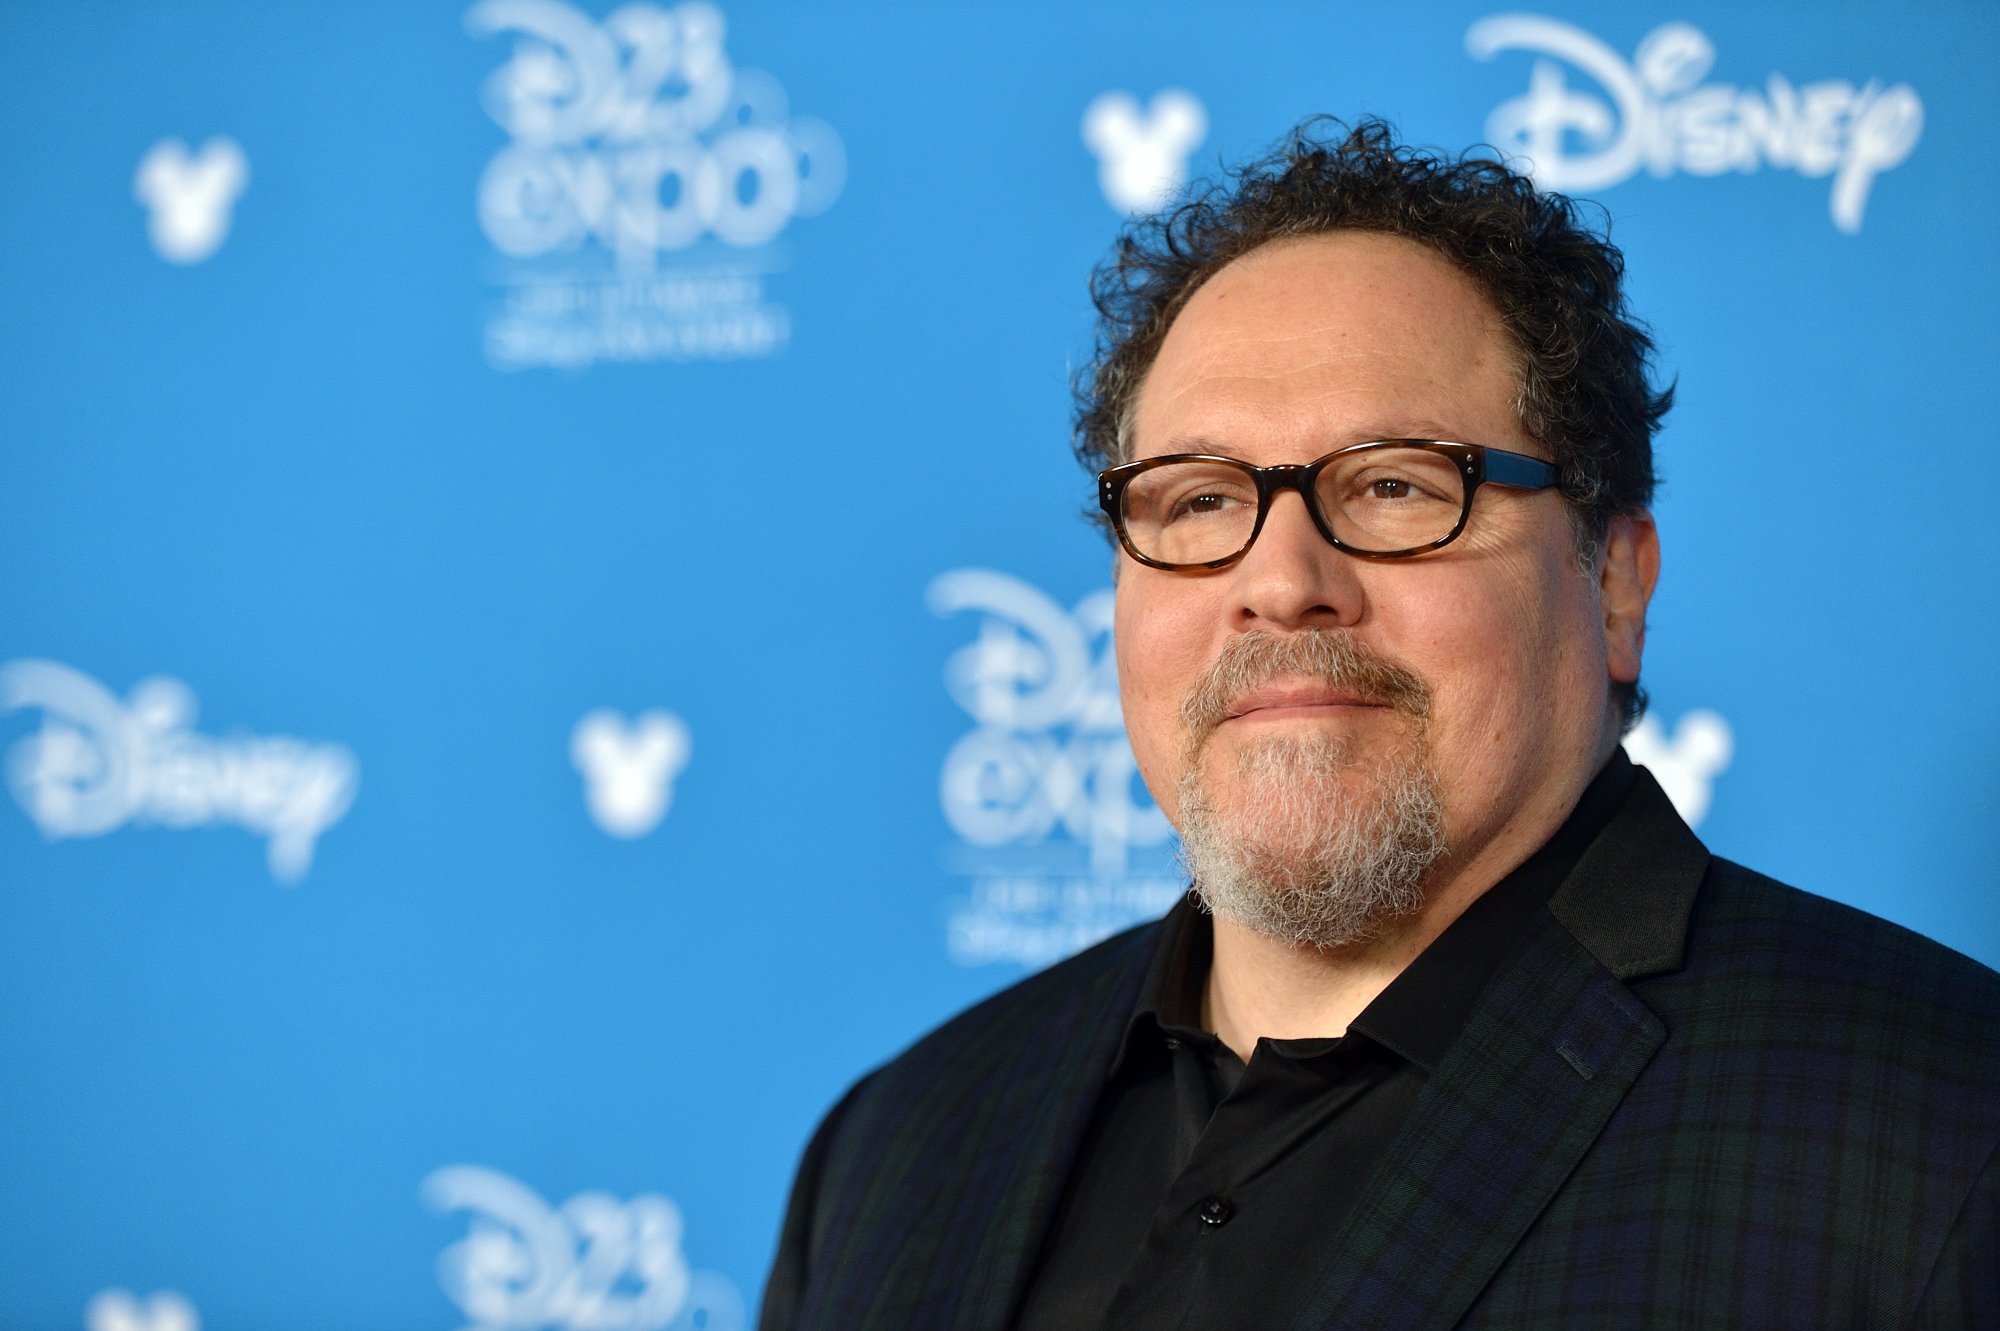 'Elf' Jon Favreau talking North Pole scenes standing in front of blue step and repeat